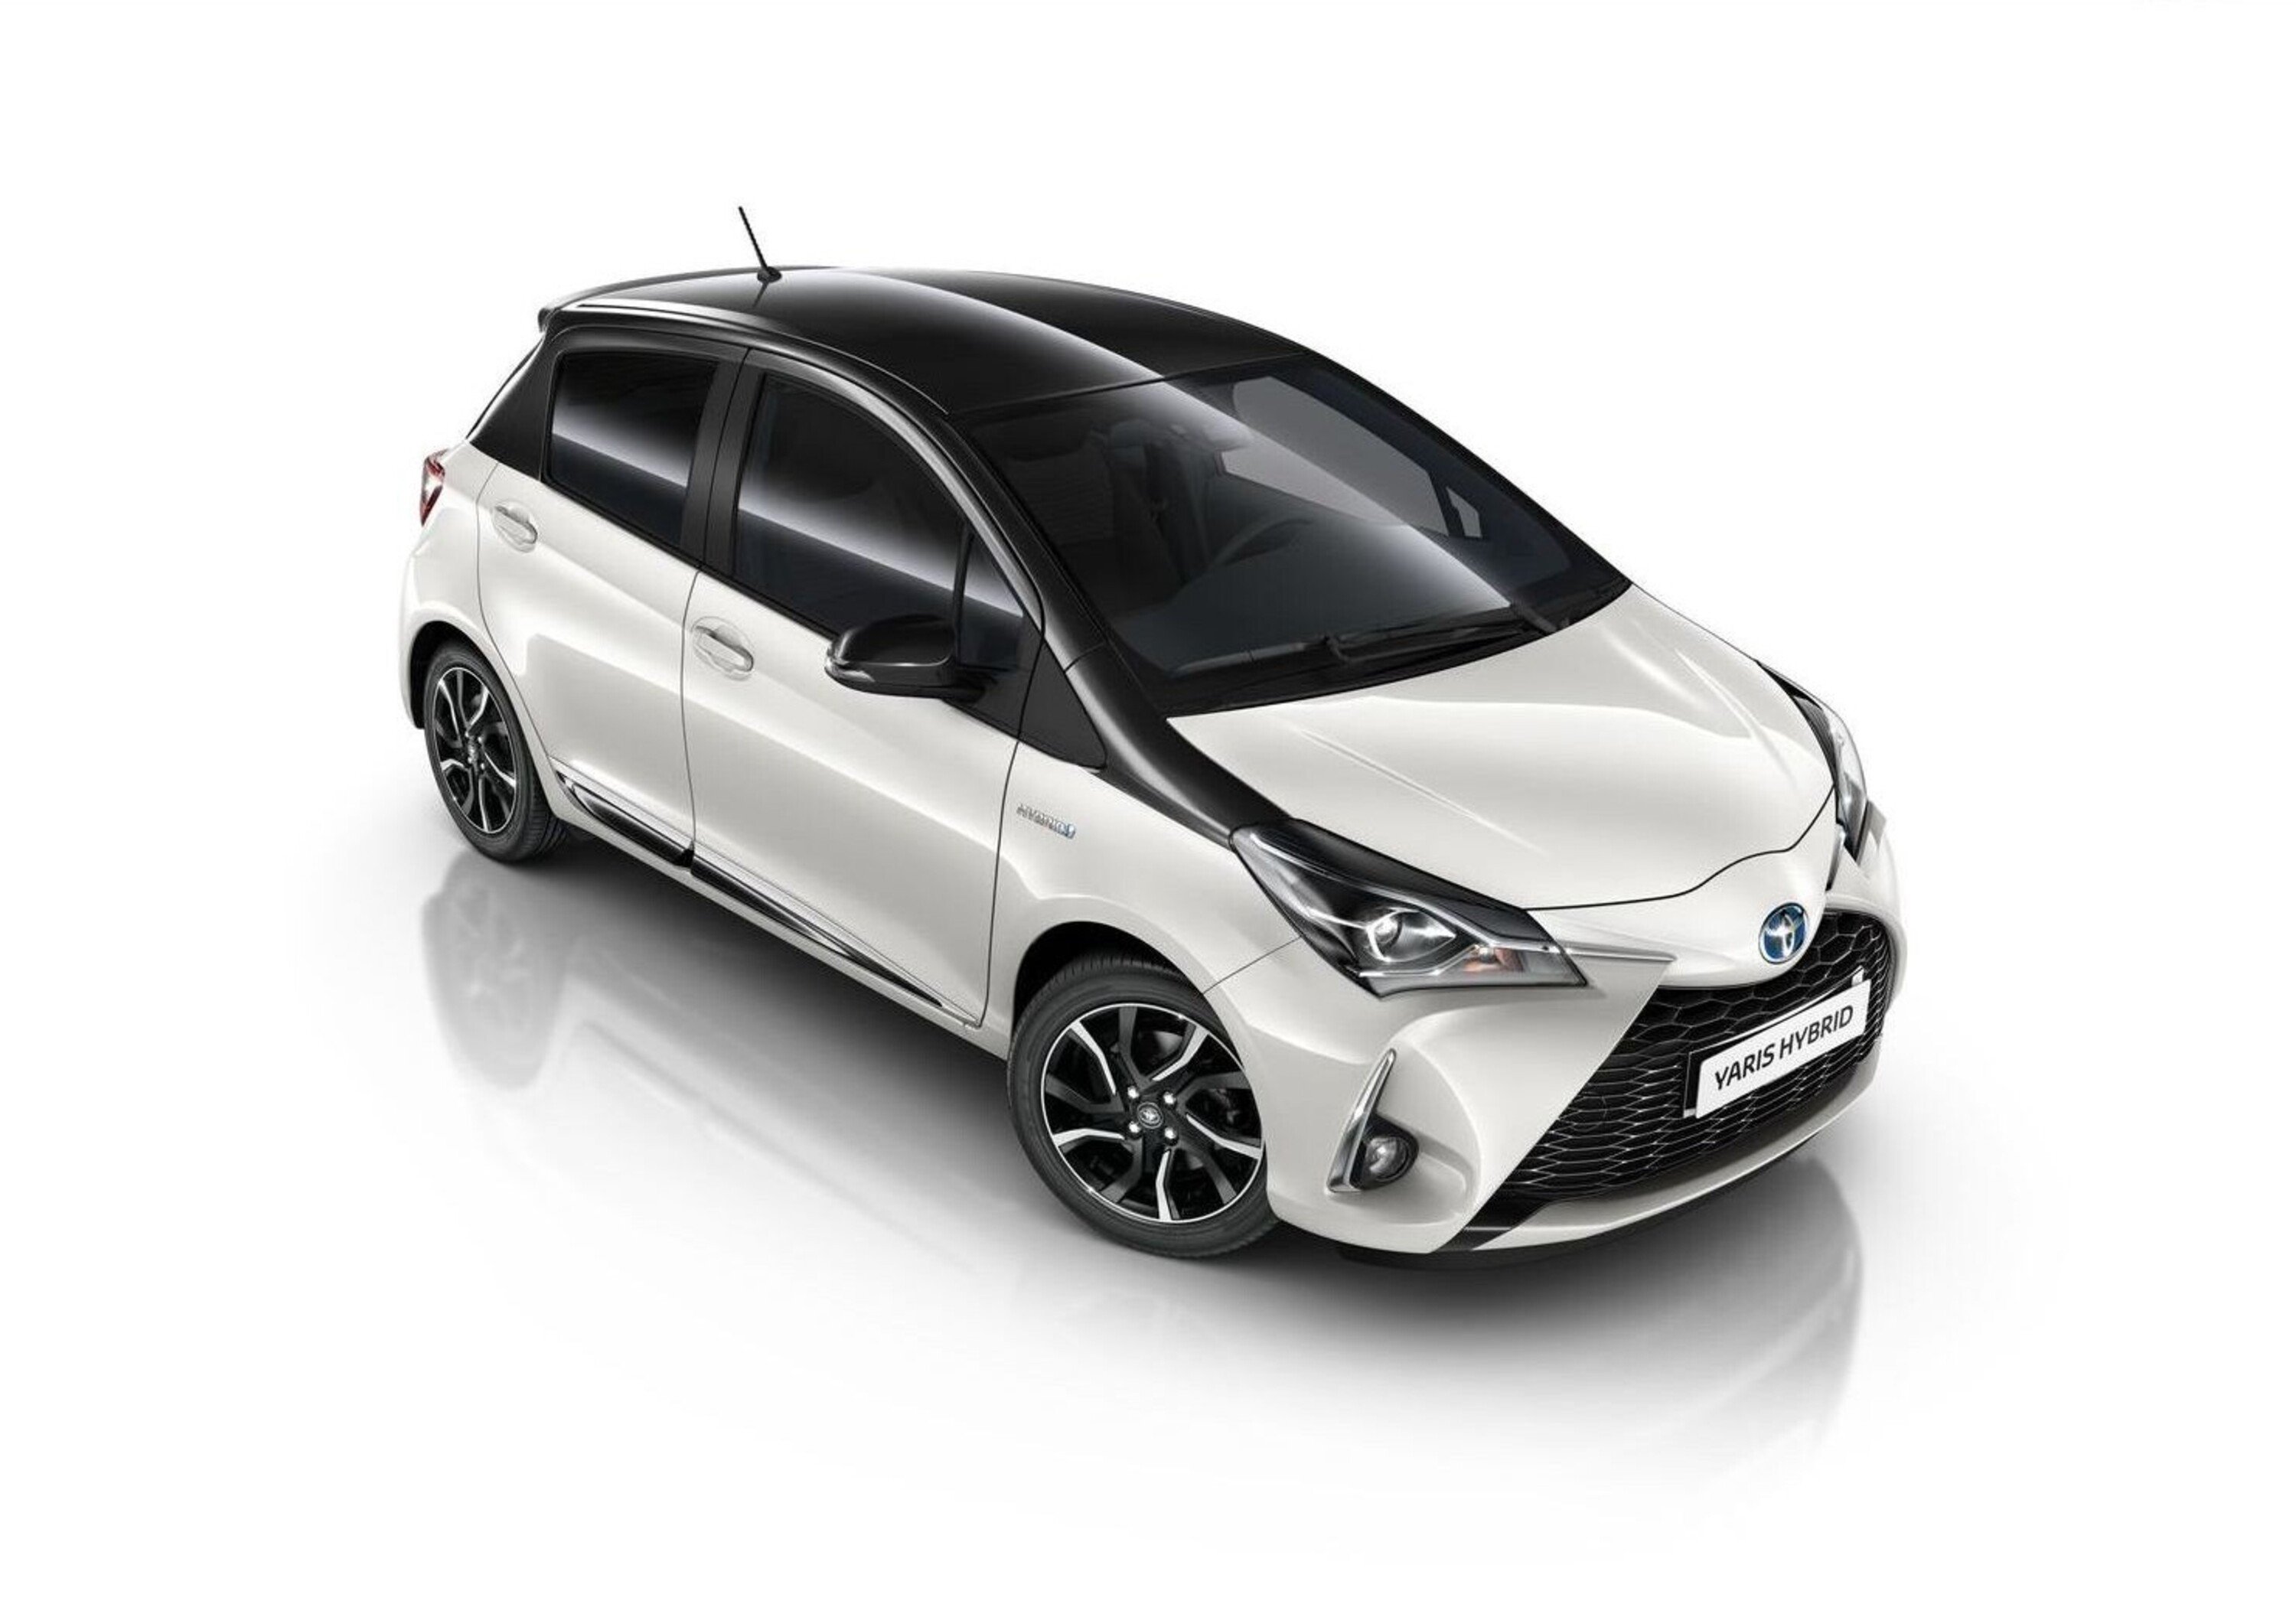 Toyota Yaris Trend White Edition, look total white